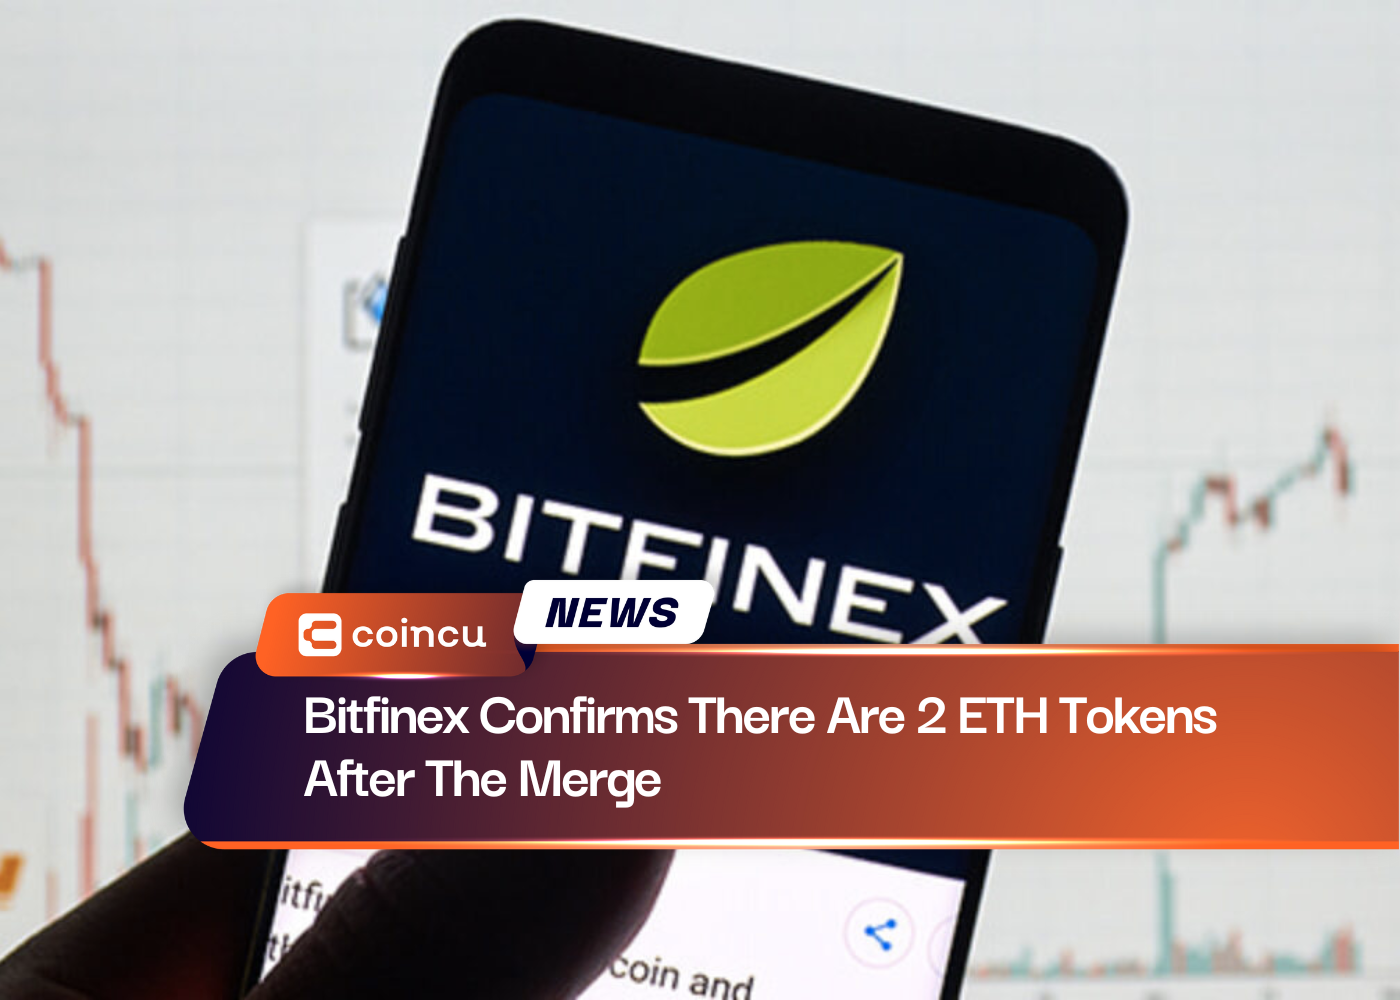 Bitfinex Confirms There Are 2 ETH Tokens After The Merge